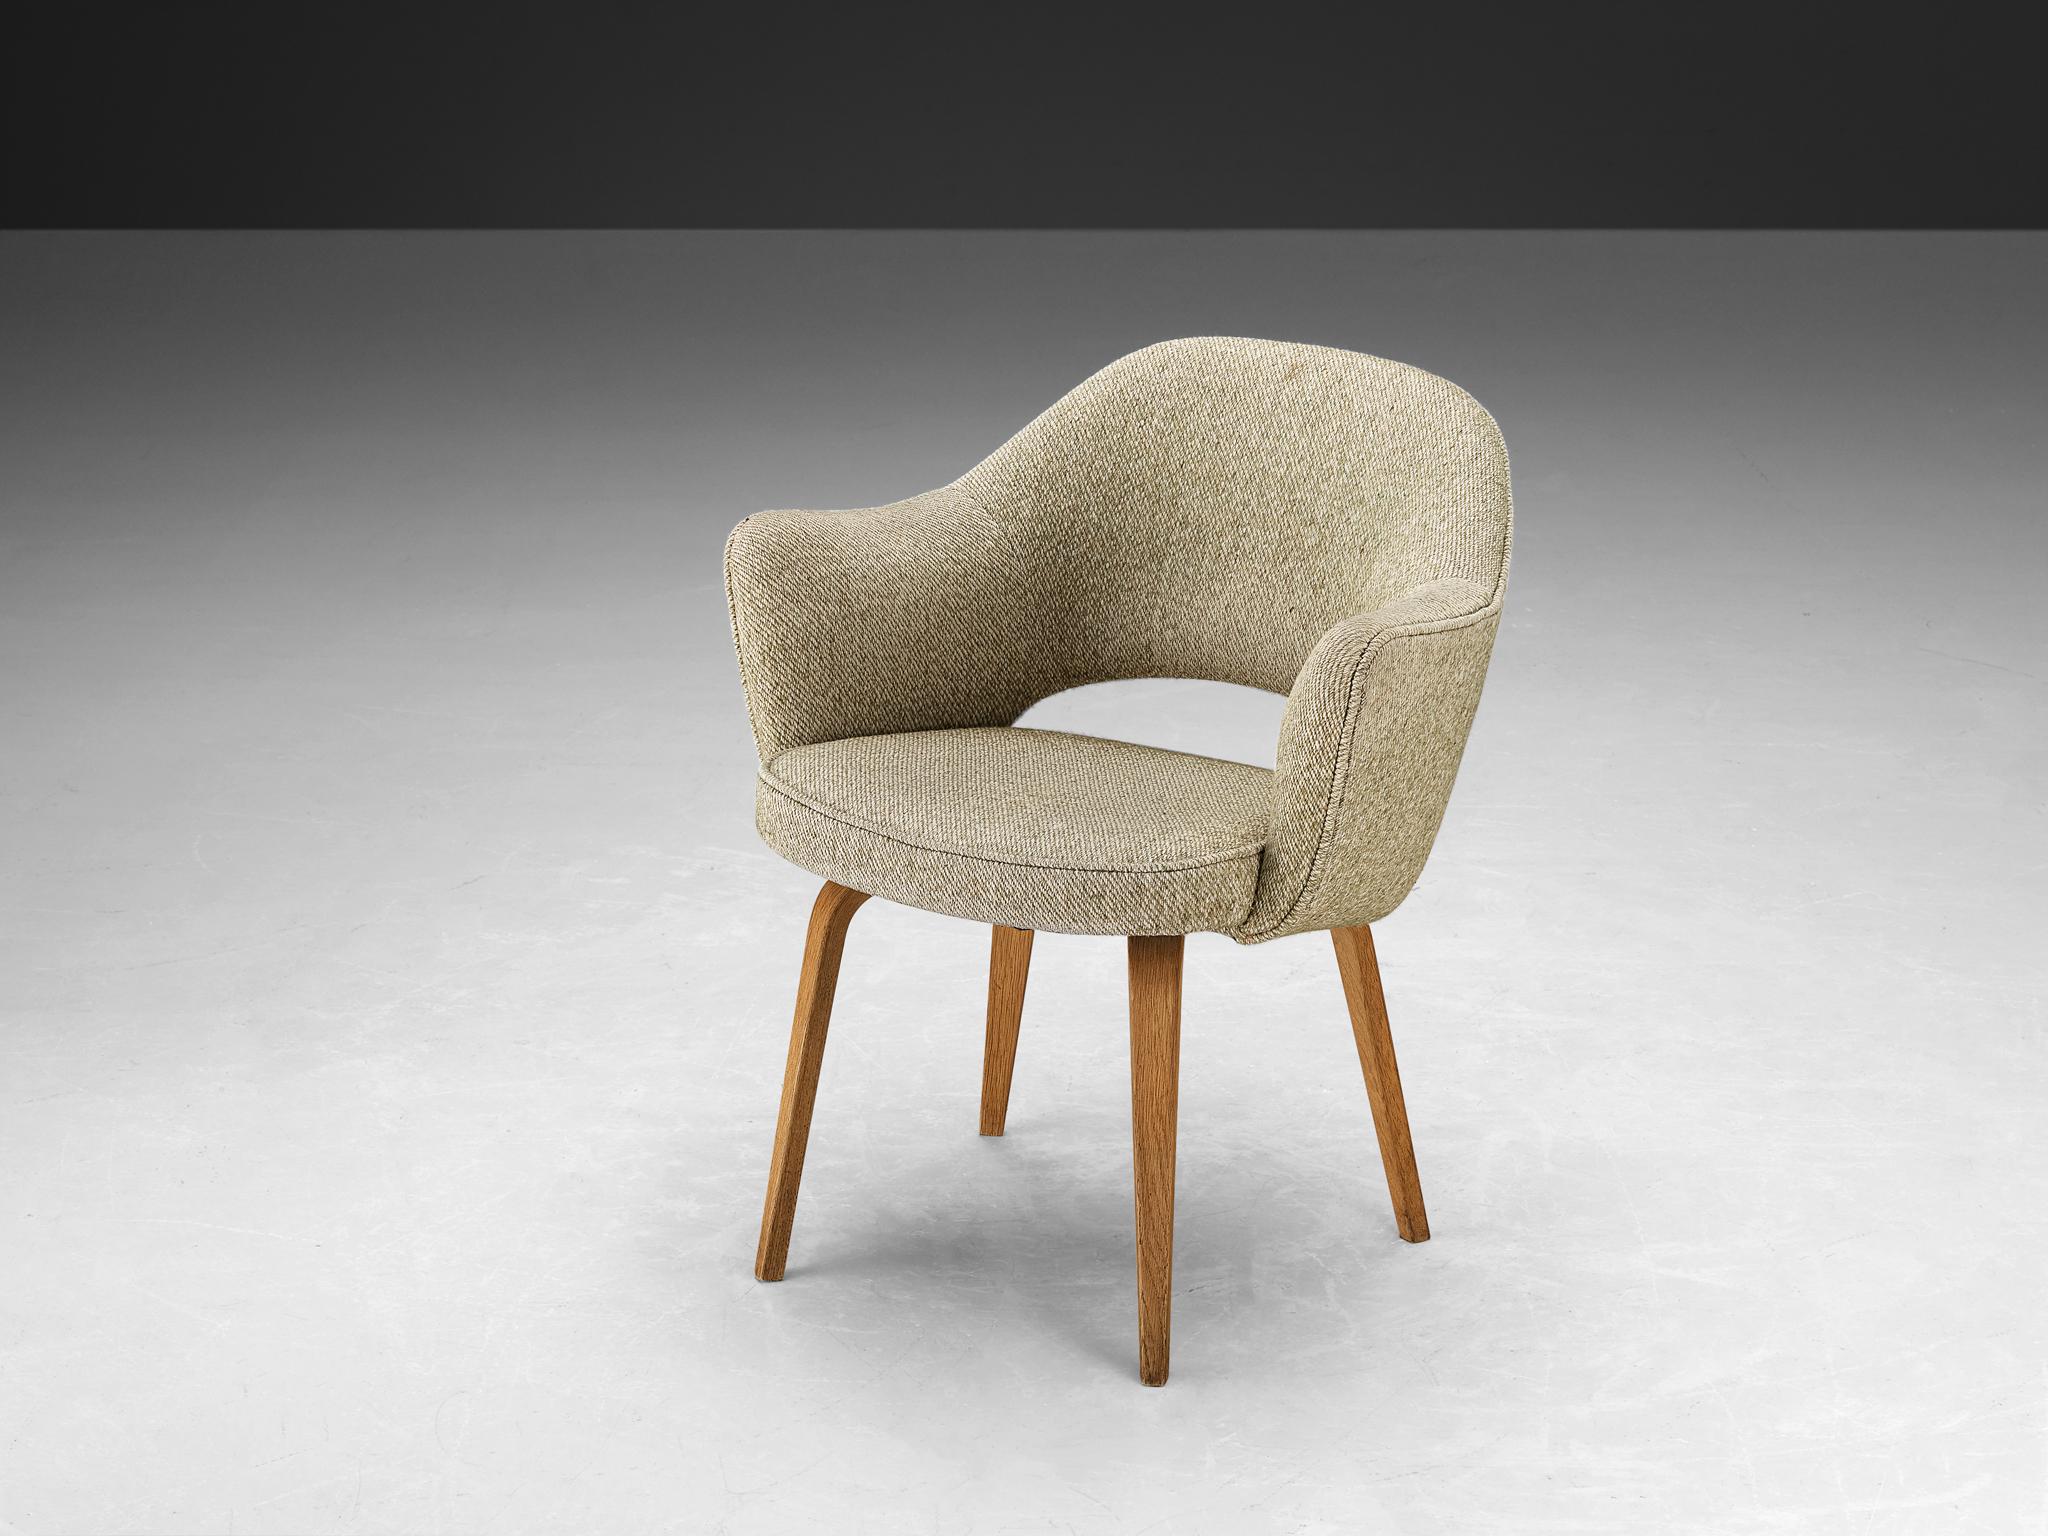 Eero Saarinen for Knoll International, dining chair, model 71, oak, fabric, United States, design 1948, later production

An organic shaped chair designed by Eero Saarinen. A fluid, sculptural form. This timeless and versatile design continues to